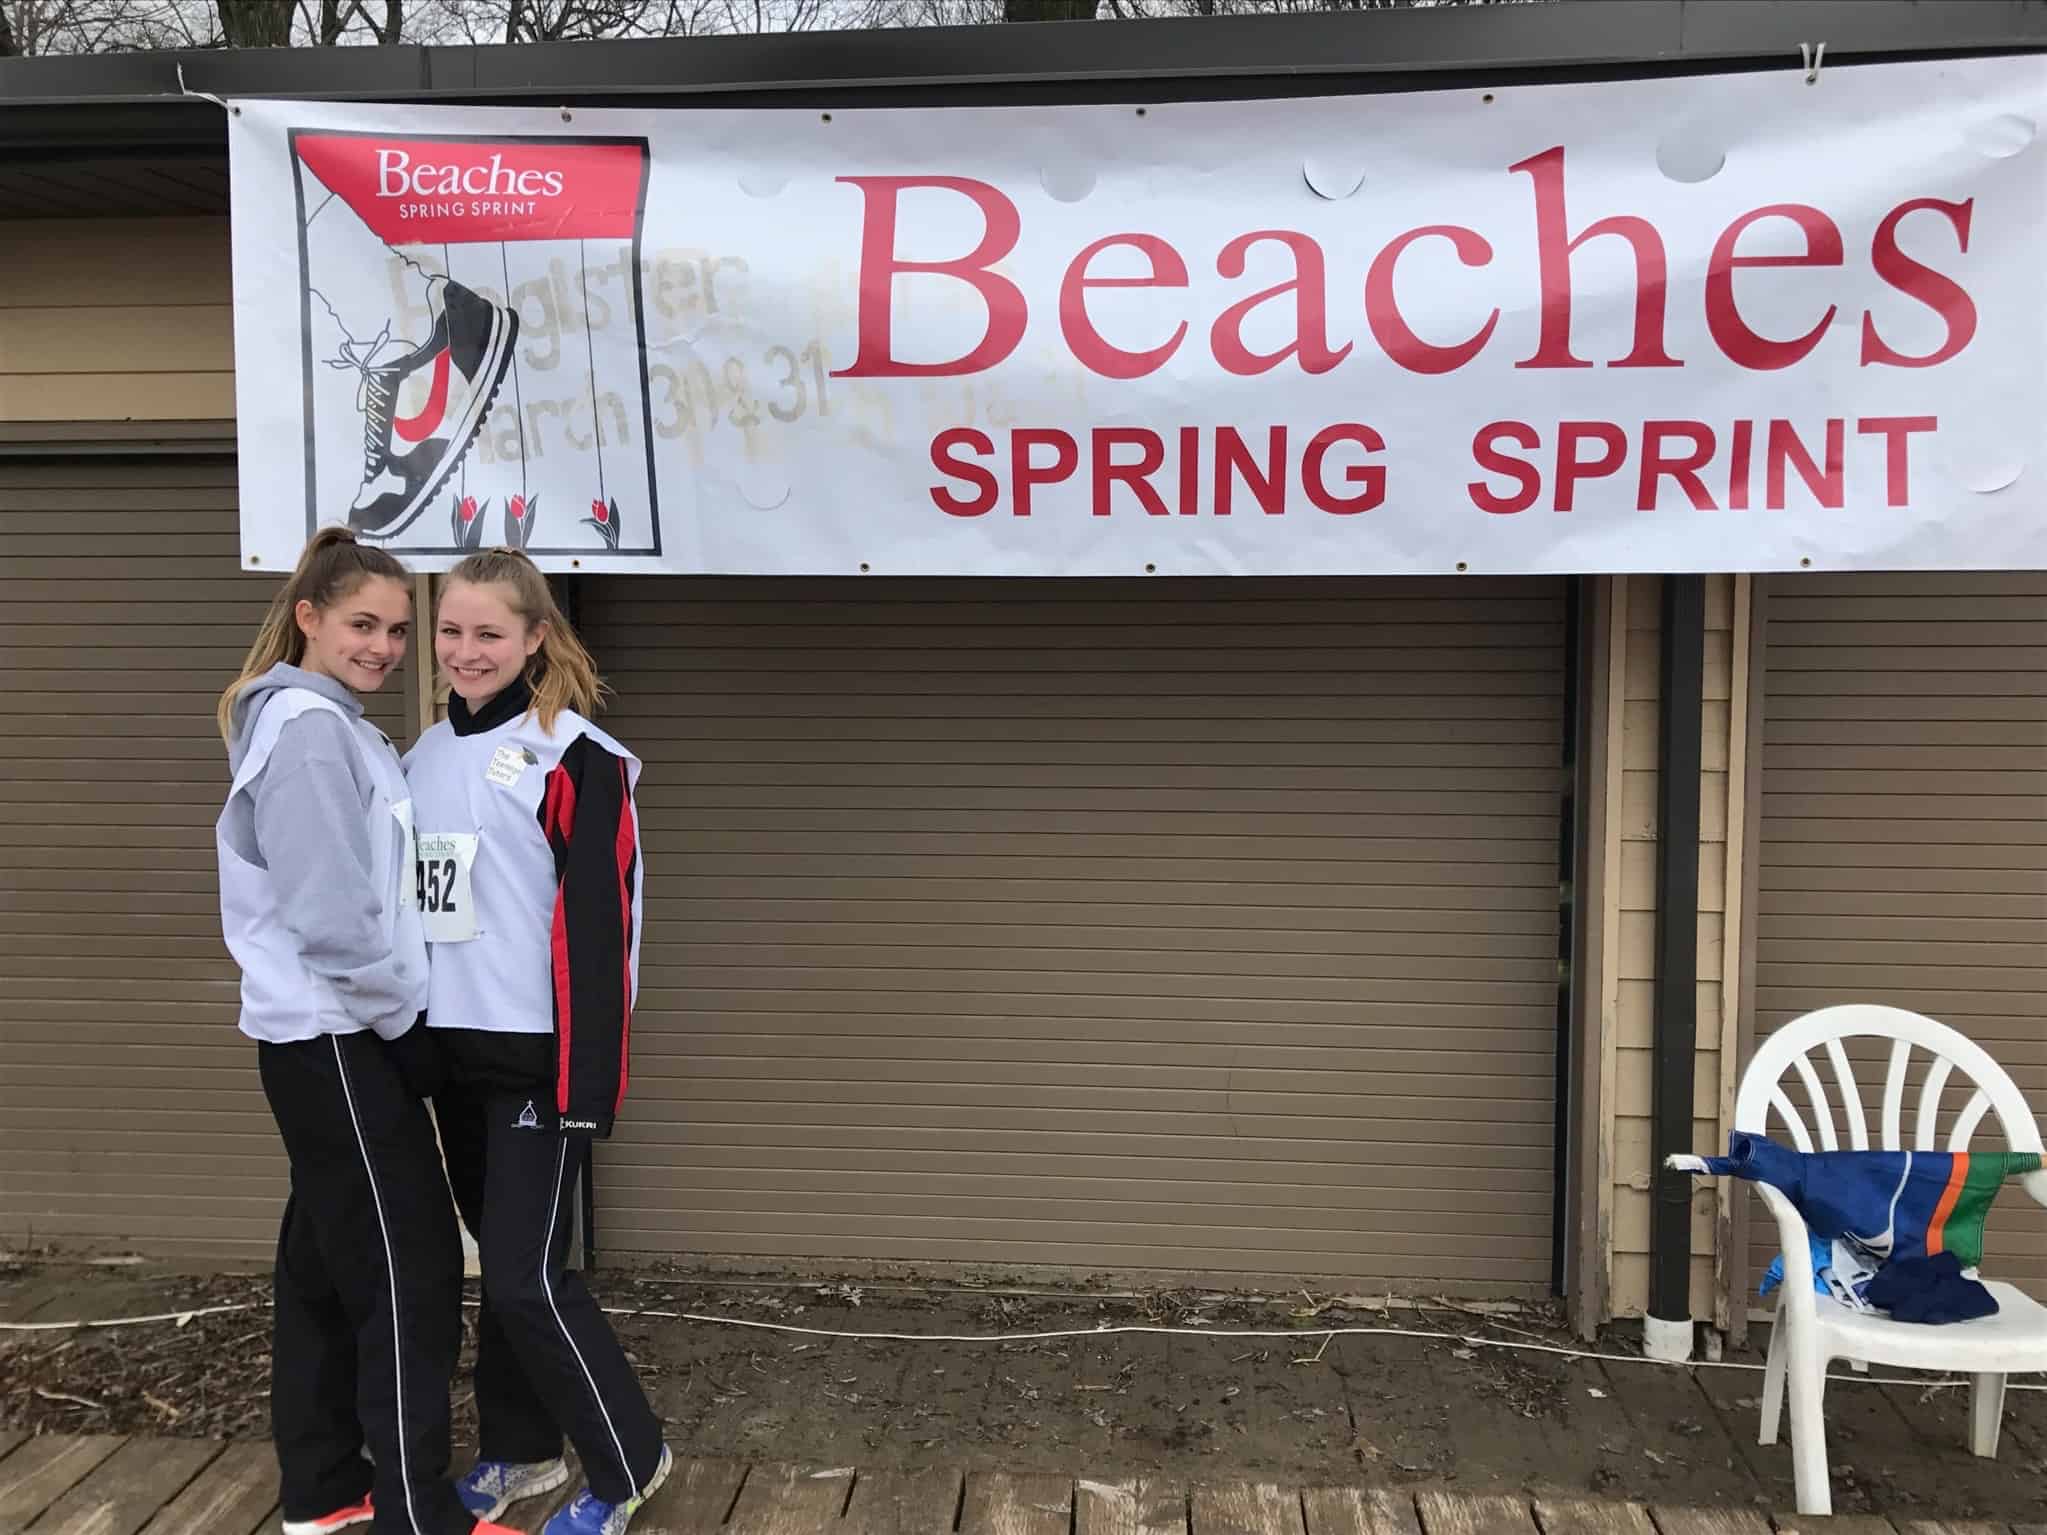 Tutors posing with the spring sprint banner